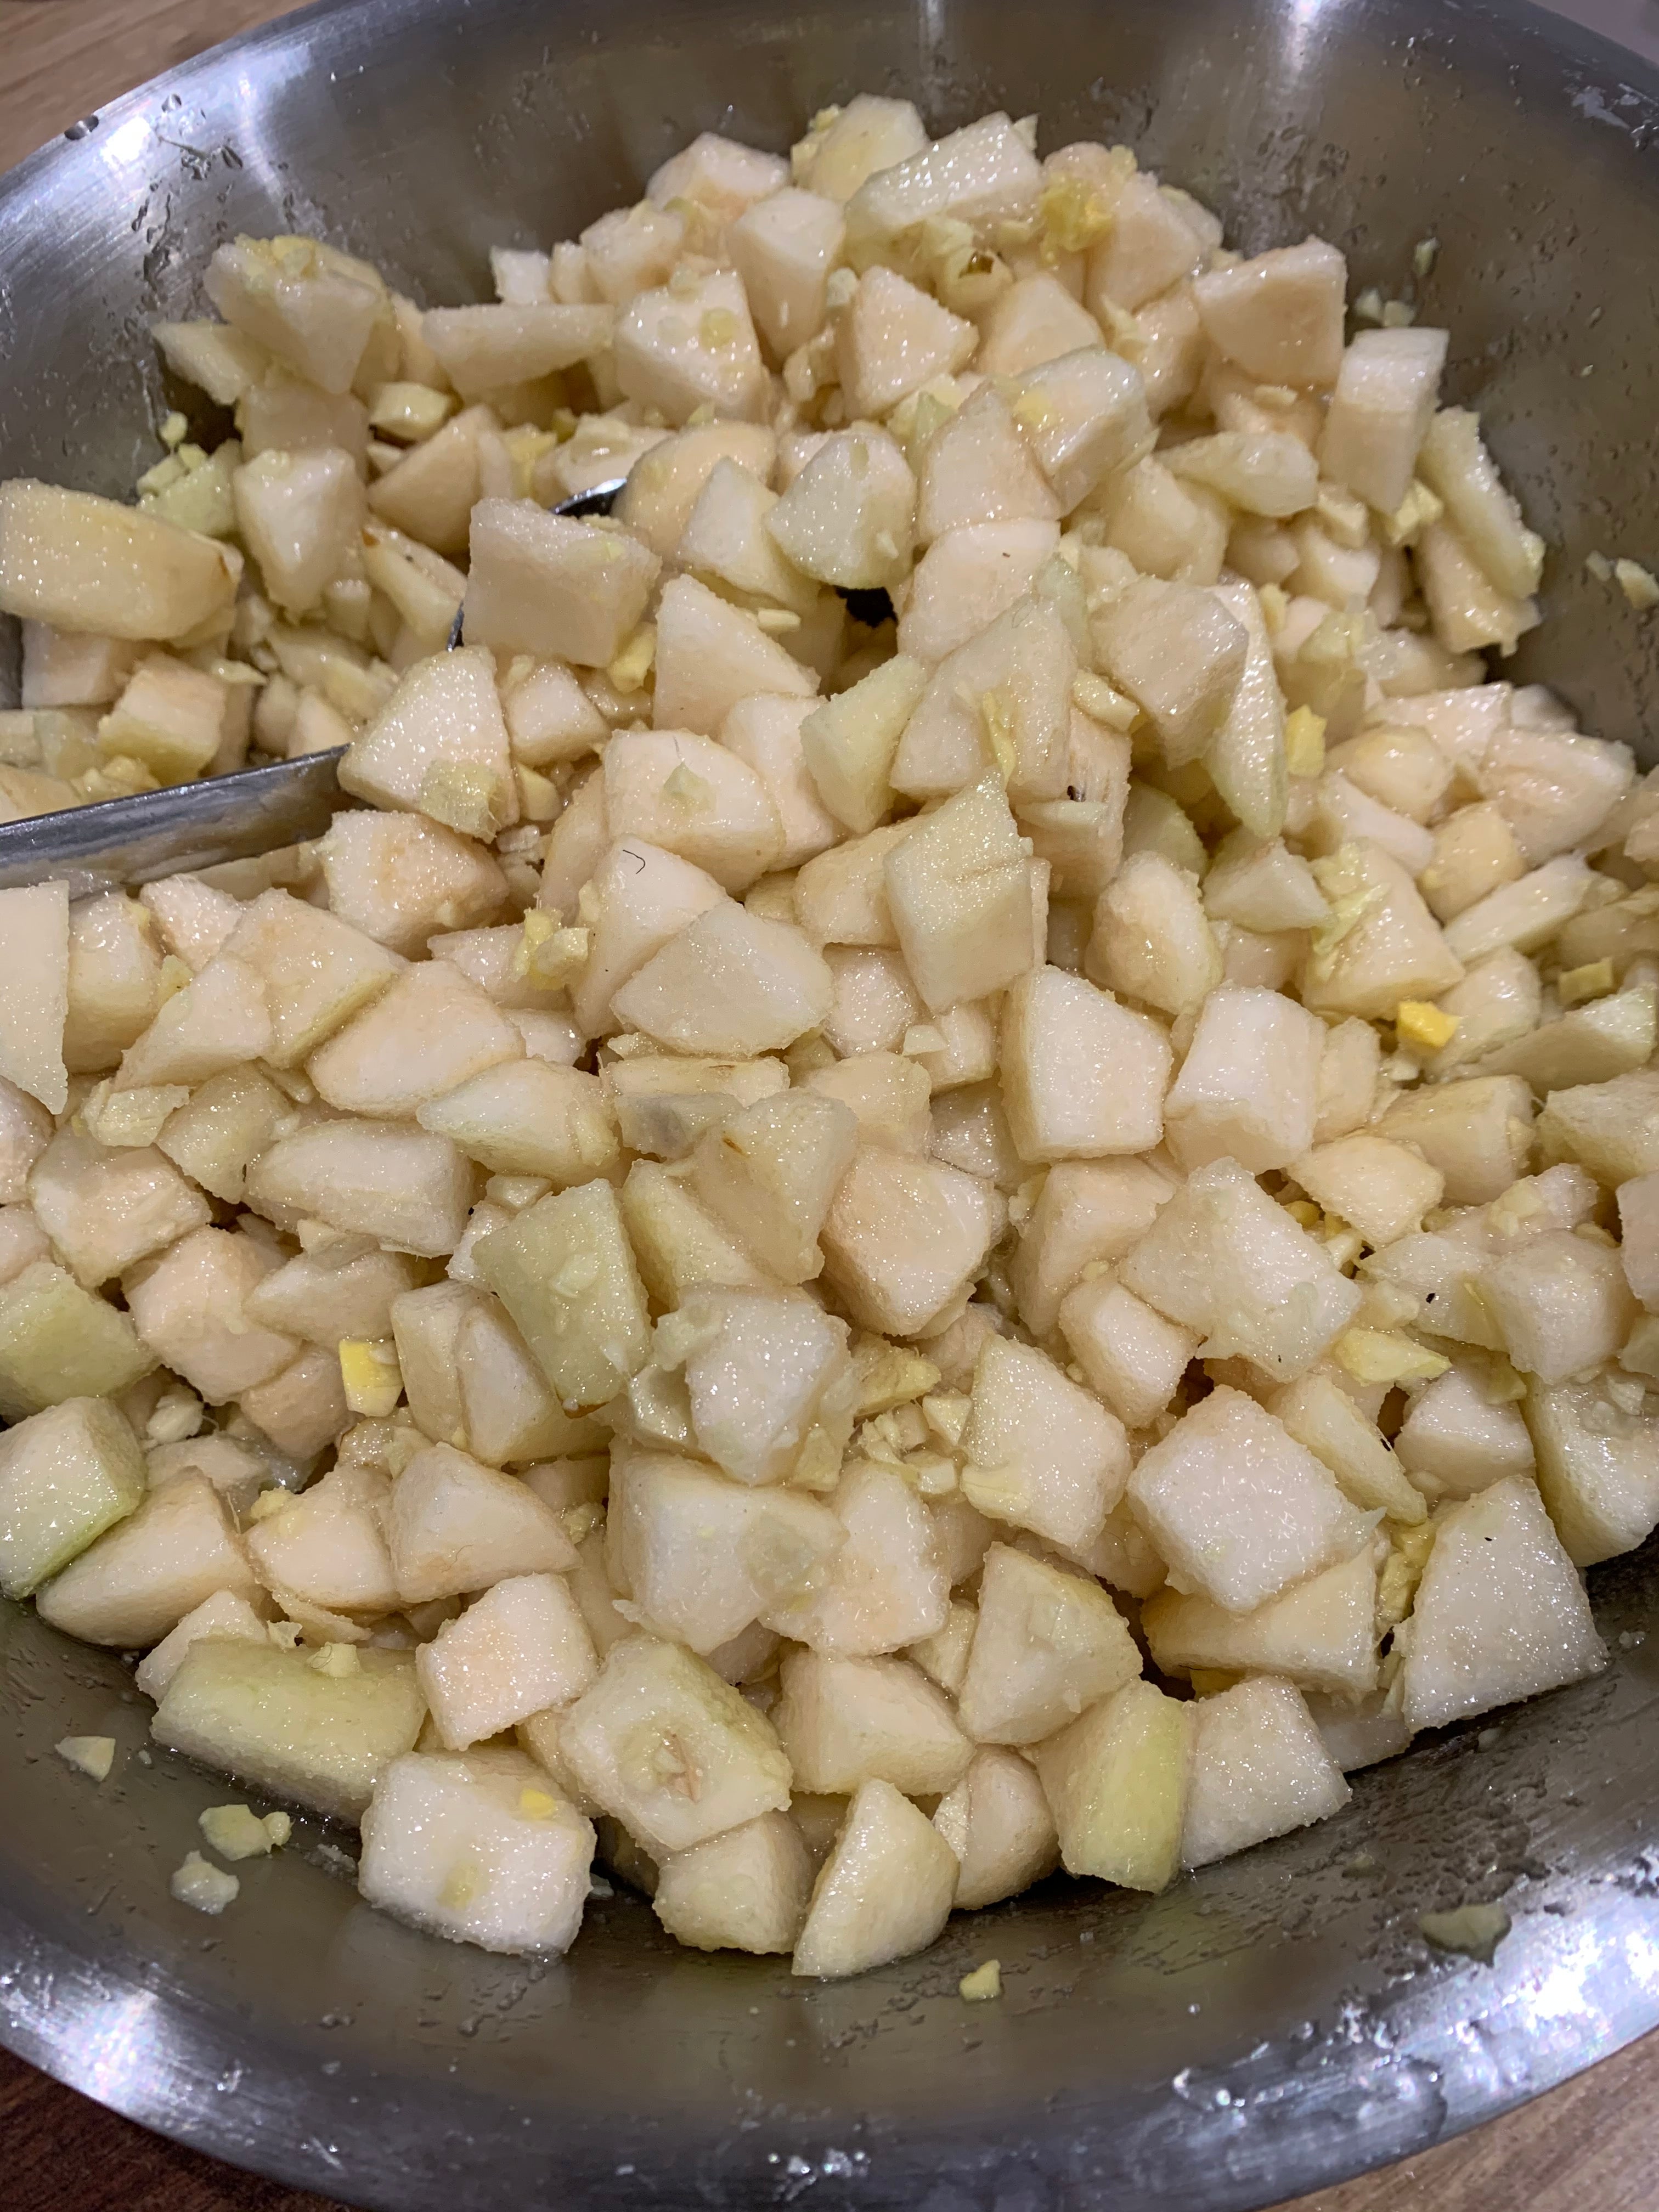 Pear and Ginger jam cooking in the pot